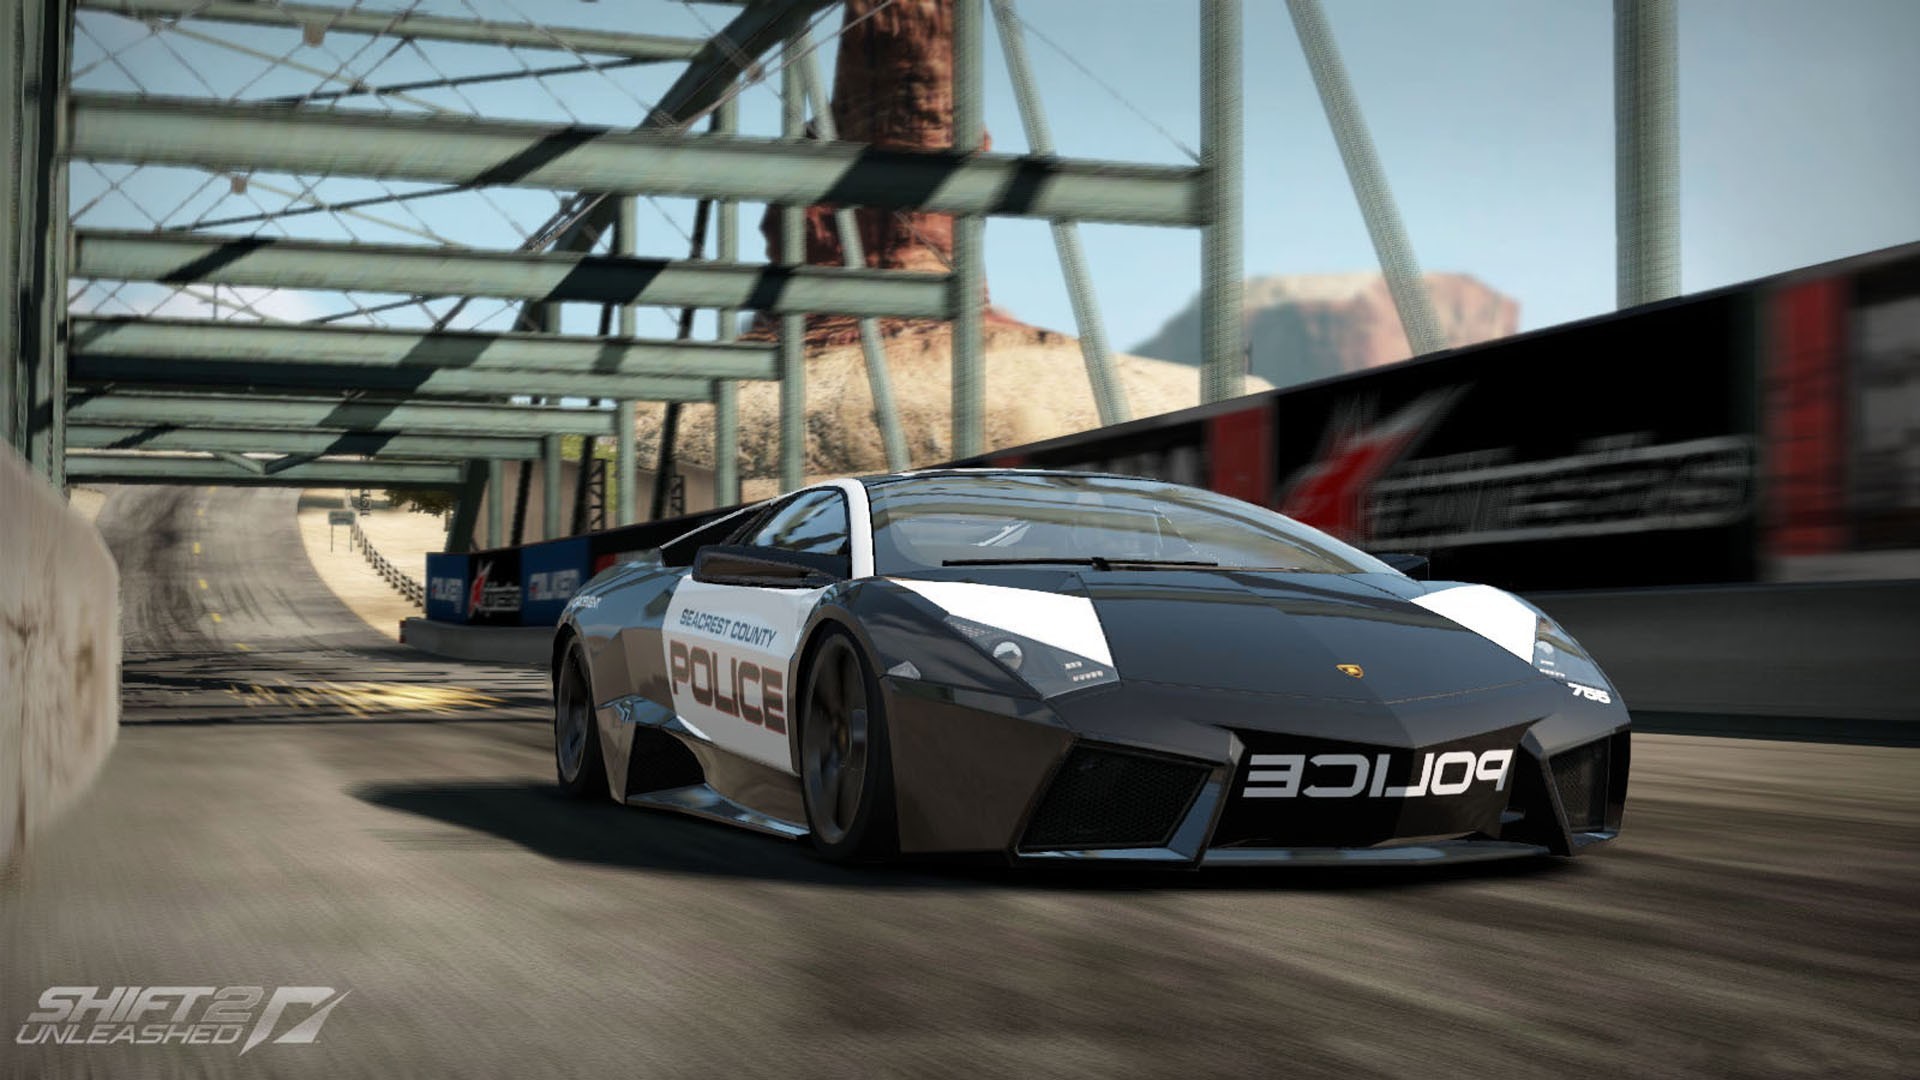 General 1920x1080 Need for Speed: Shift Shift 2: Unleashed video games car police cars vehicle